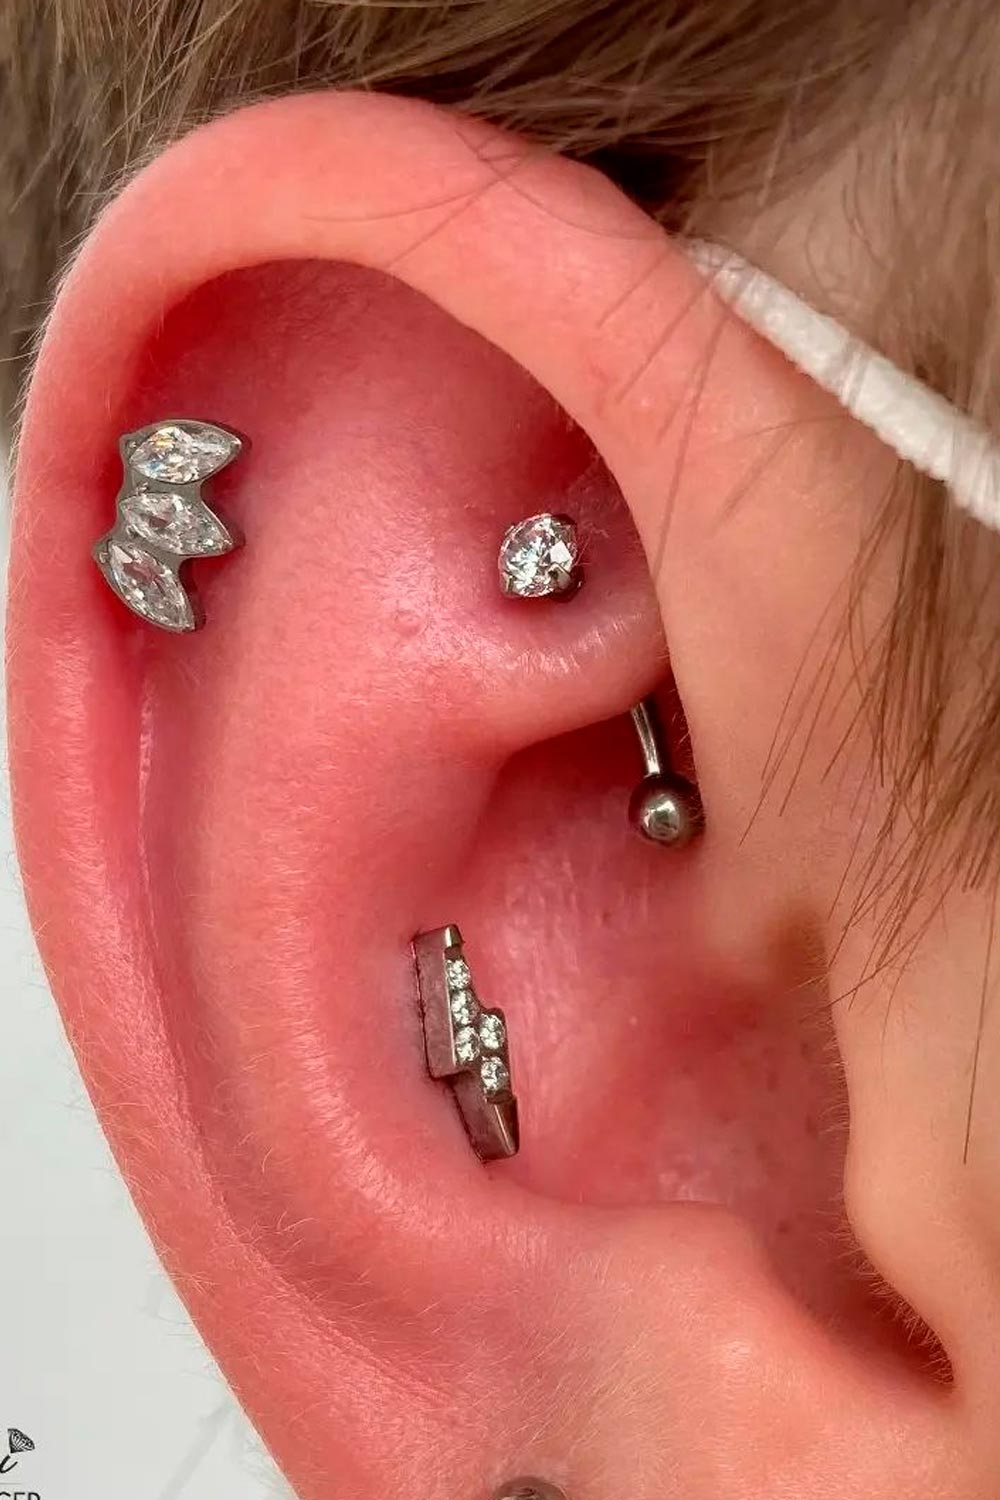 Rook Piercing. What is it?